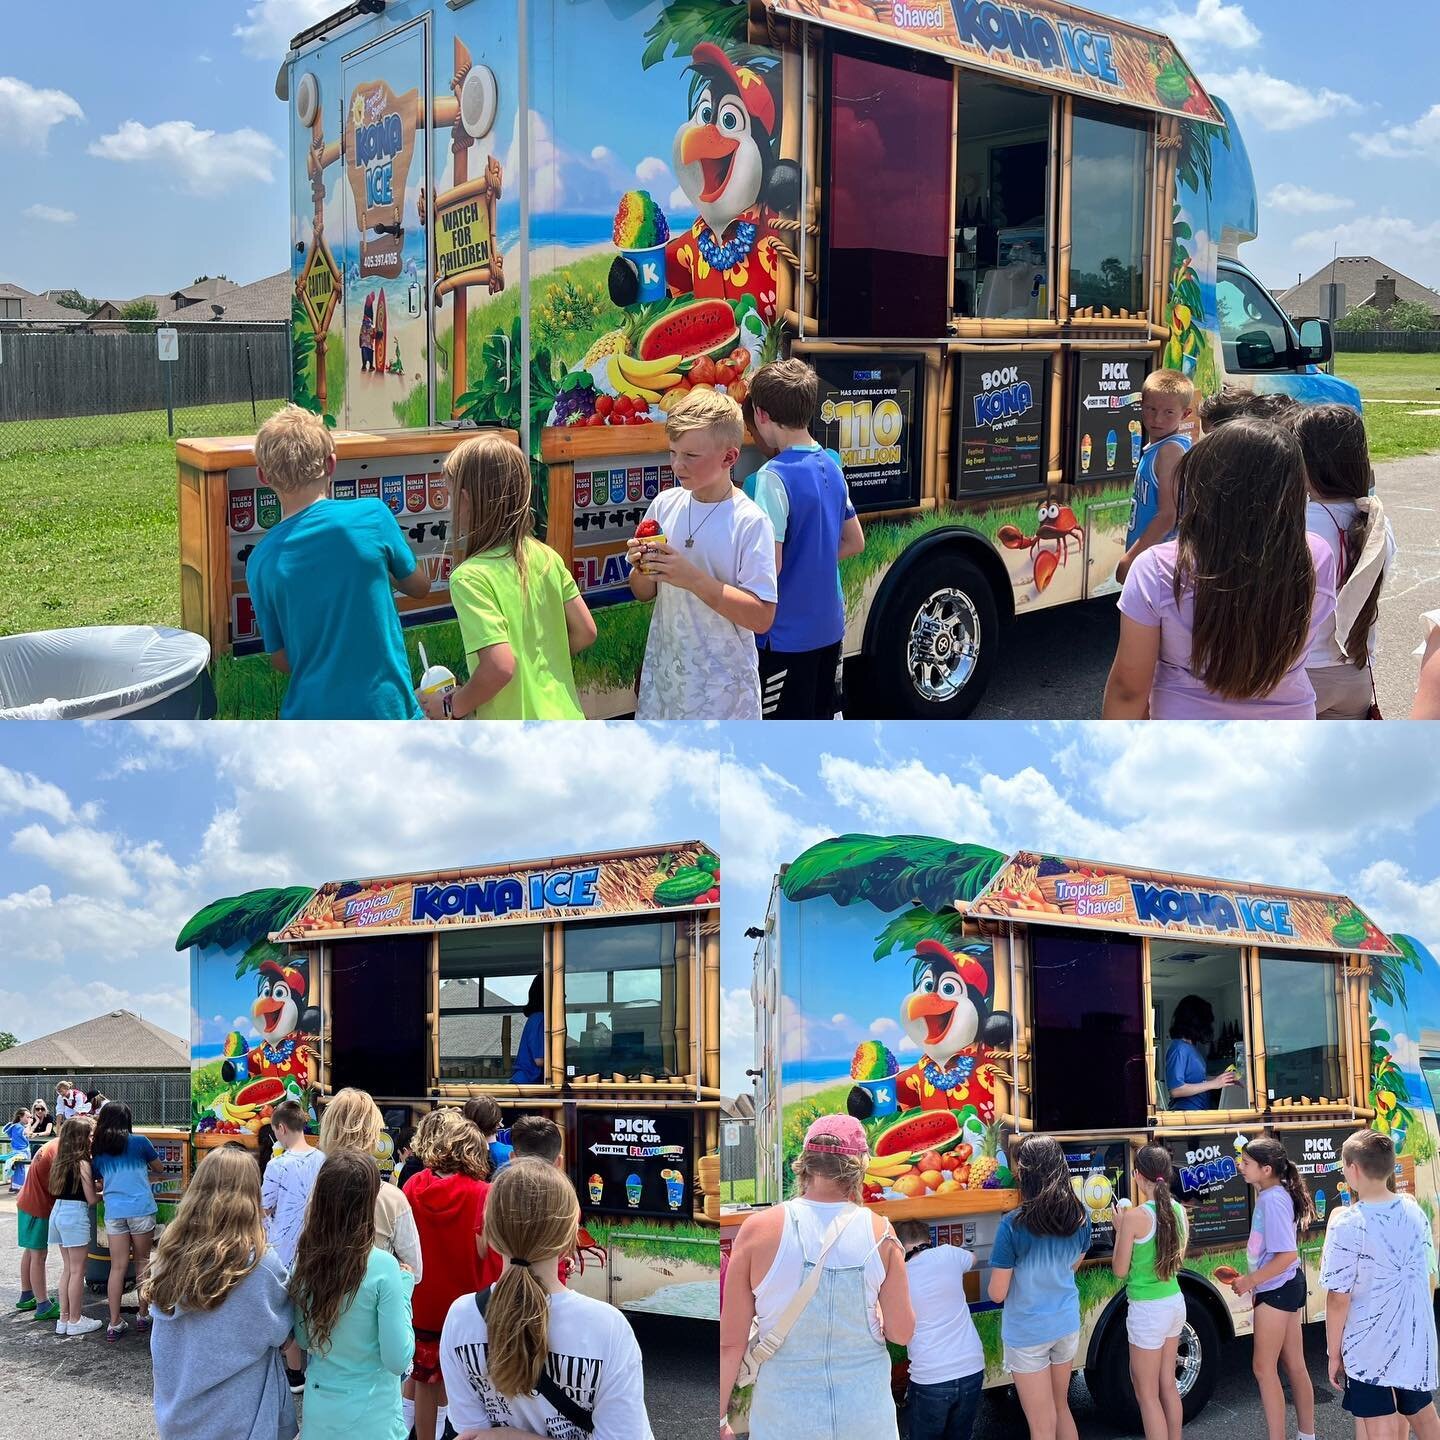 Ask your kids about their special treat today! All kids and staff were treated to a snow cone! We are so proud of all the hard work our Cross Timbers students did this year! We also love awesome our staff!! Thanks Kona Ice!